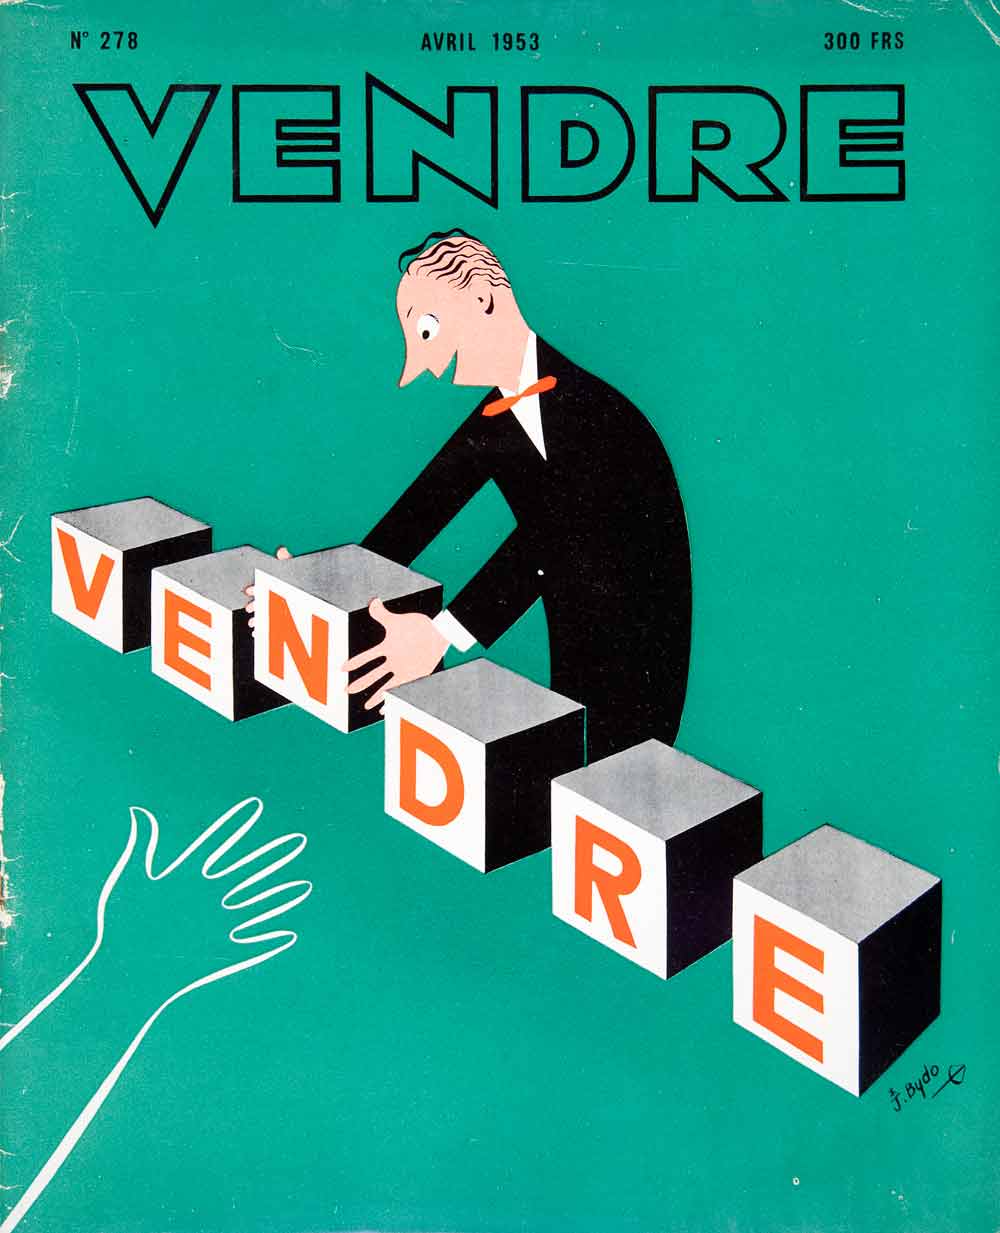 1953 Lithograph Cover Vendre April French Bydo Blocks Spelling Bowtie Hand VEN8